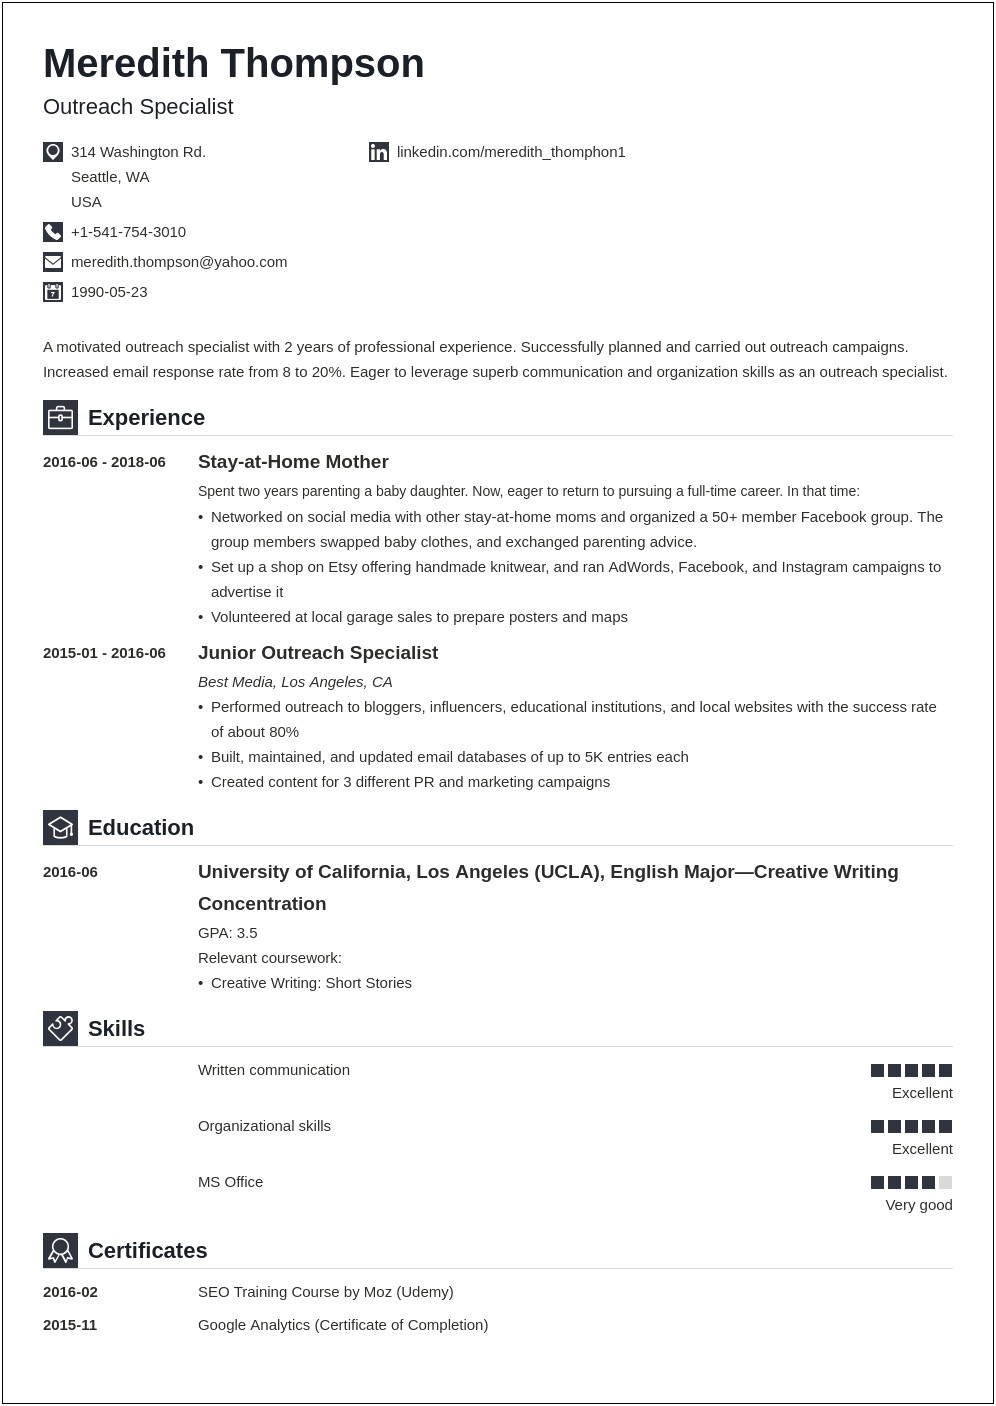 Work From Home Resume Objective Sample